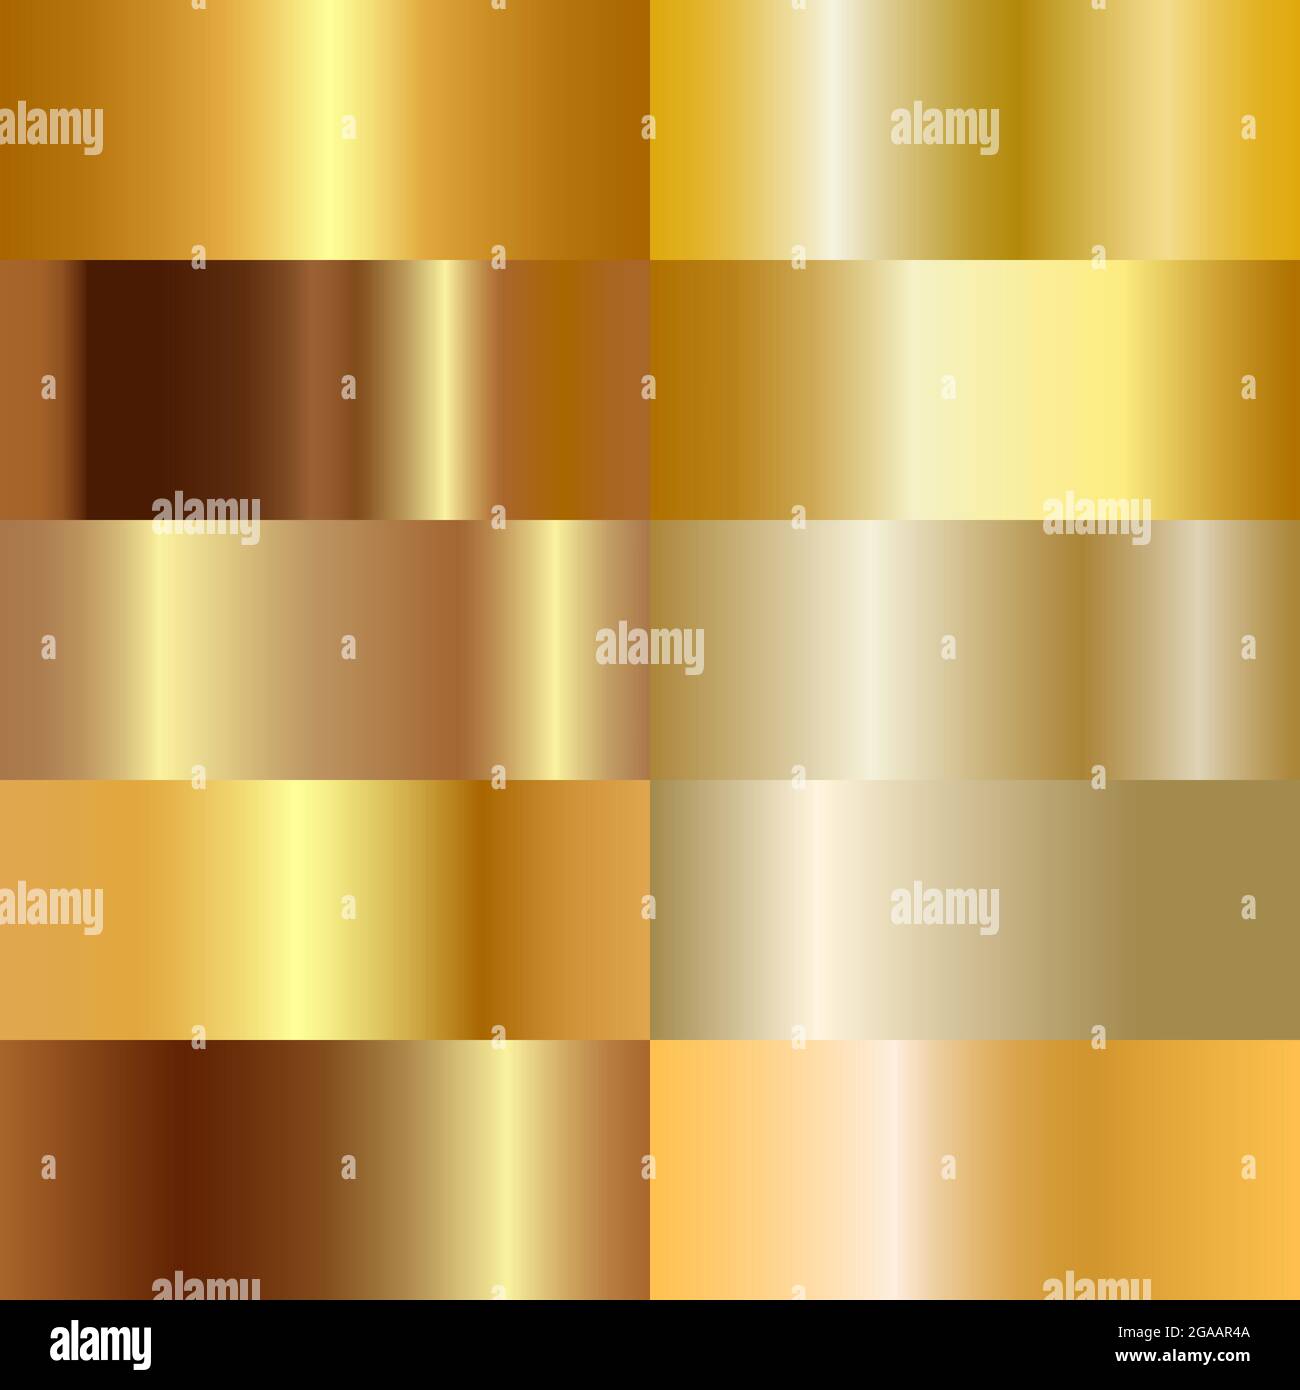 Gold Foil Texture Background Stock Photo - Image of glossy, decoration:  83797416